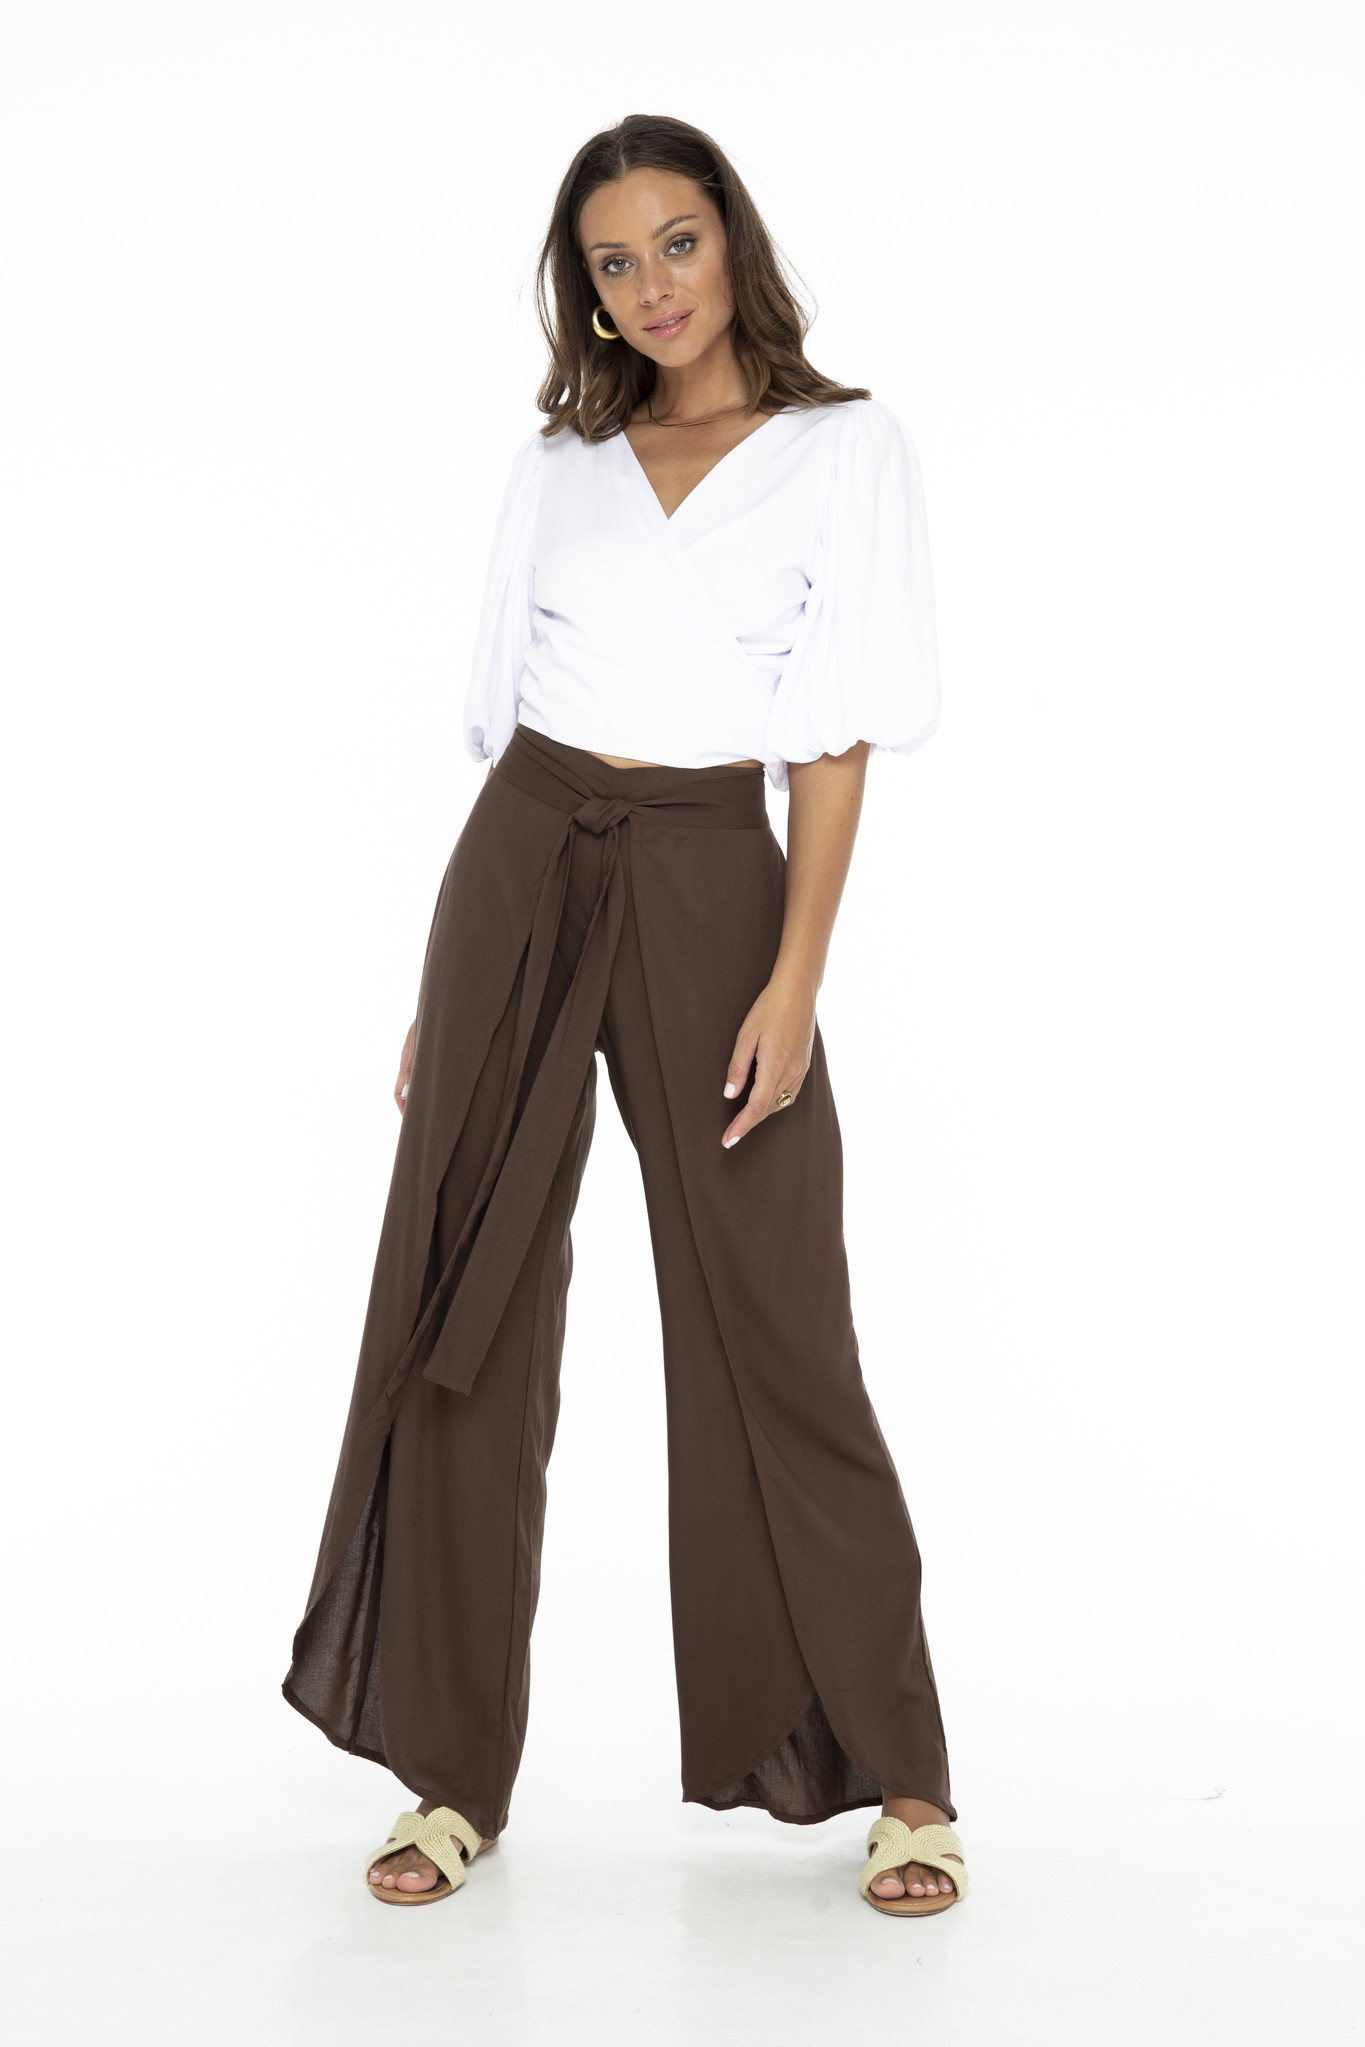 Tuphregyow Women's High Waist Baggy Wrap Pants Clearance Drawstring Fashion  with Pockets Pants Trendy Fitting Pleated Wide Leg Leisure Flowy Pants New  Style Solid Beige XL - Walmart.com